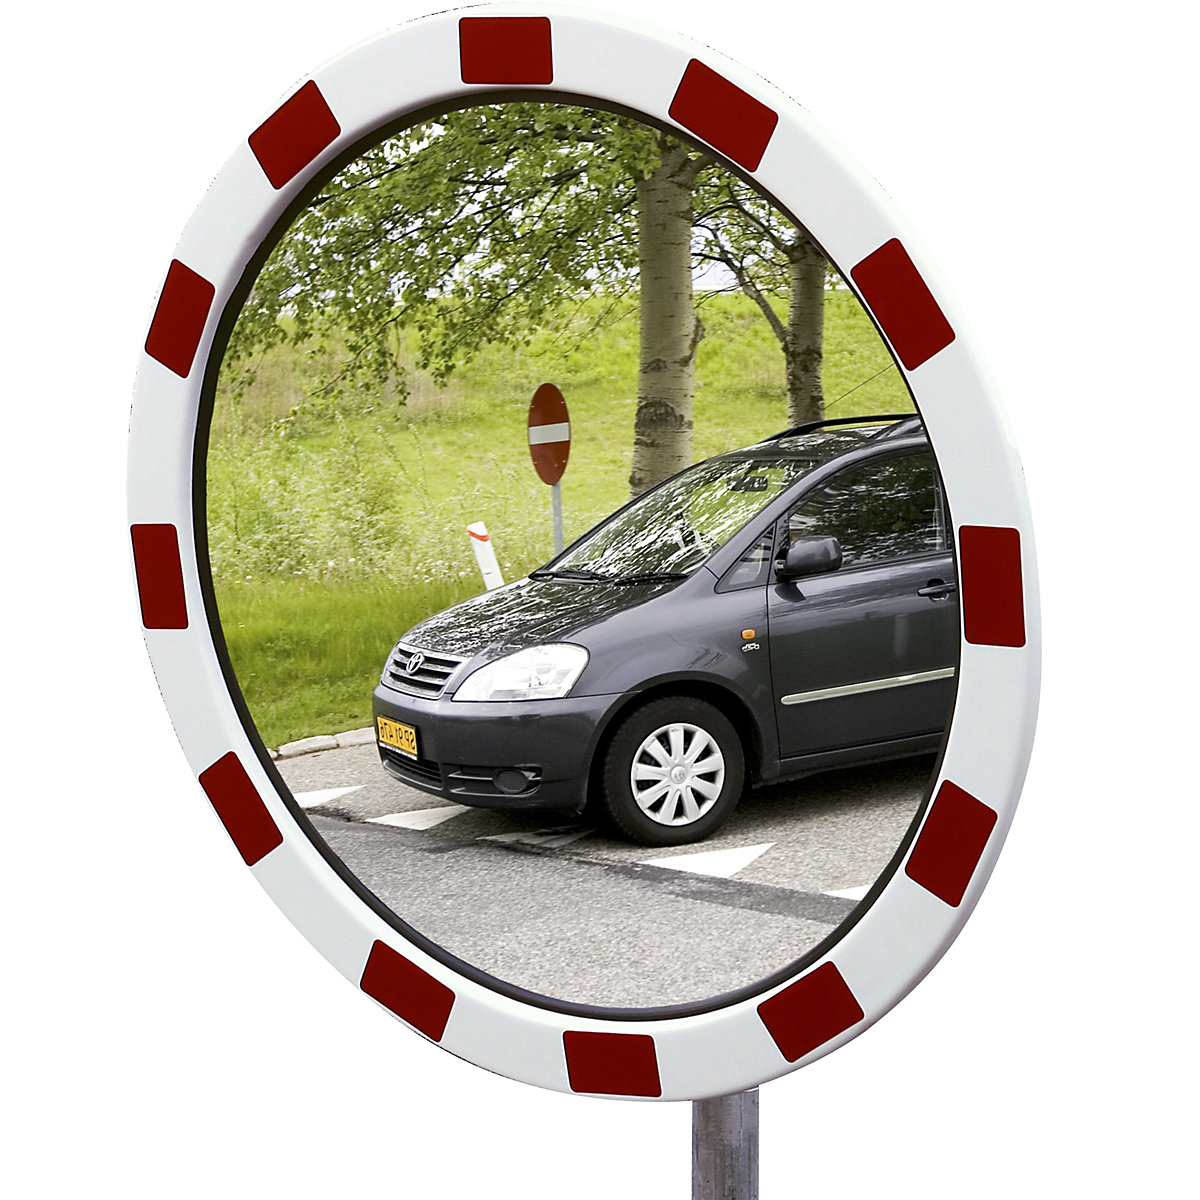 Traffic mirrors made of acrylic glass